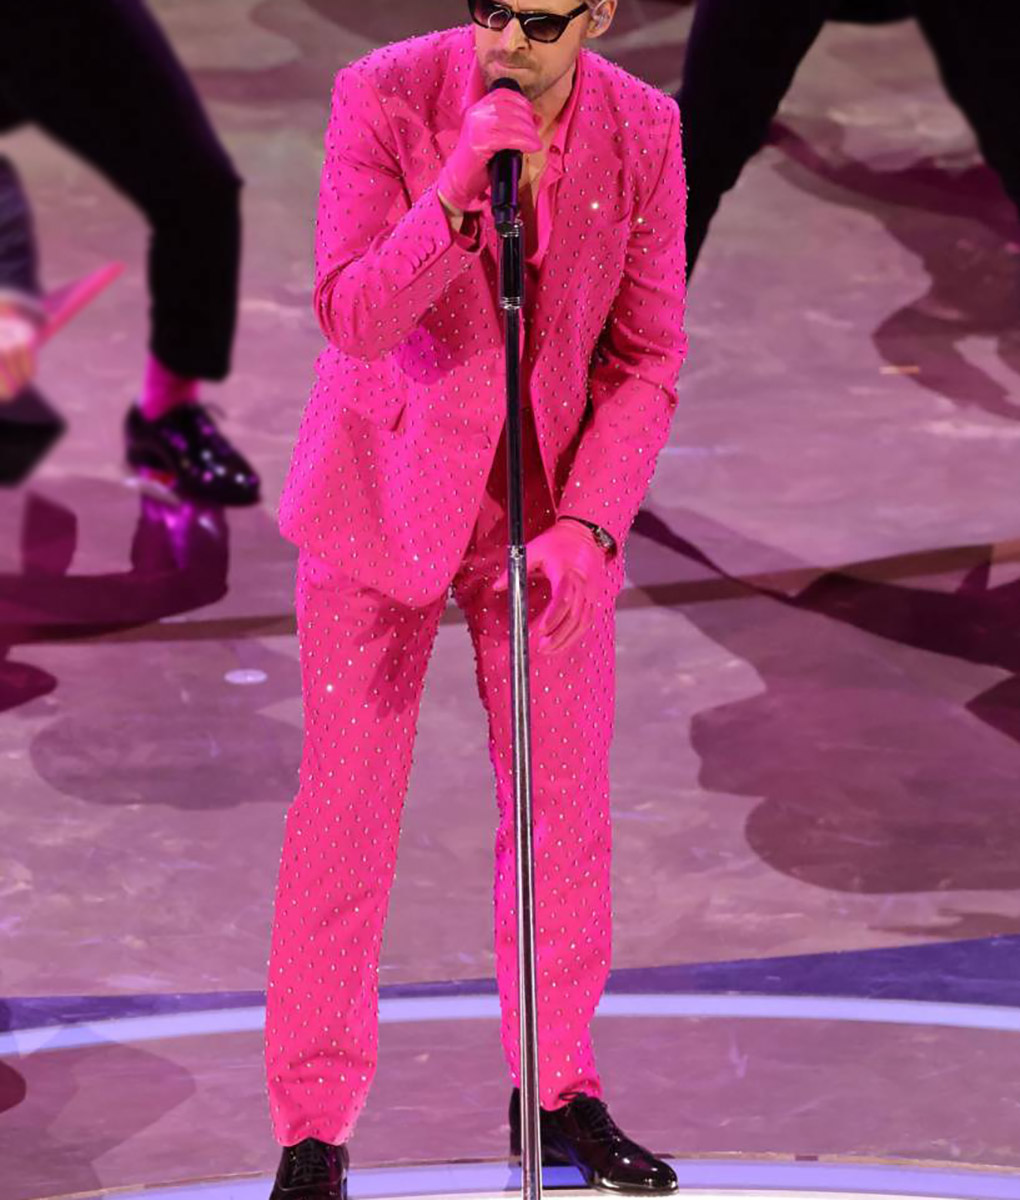 Ryan Gosling Oscars Bedazzled Pink Suit (5)